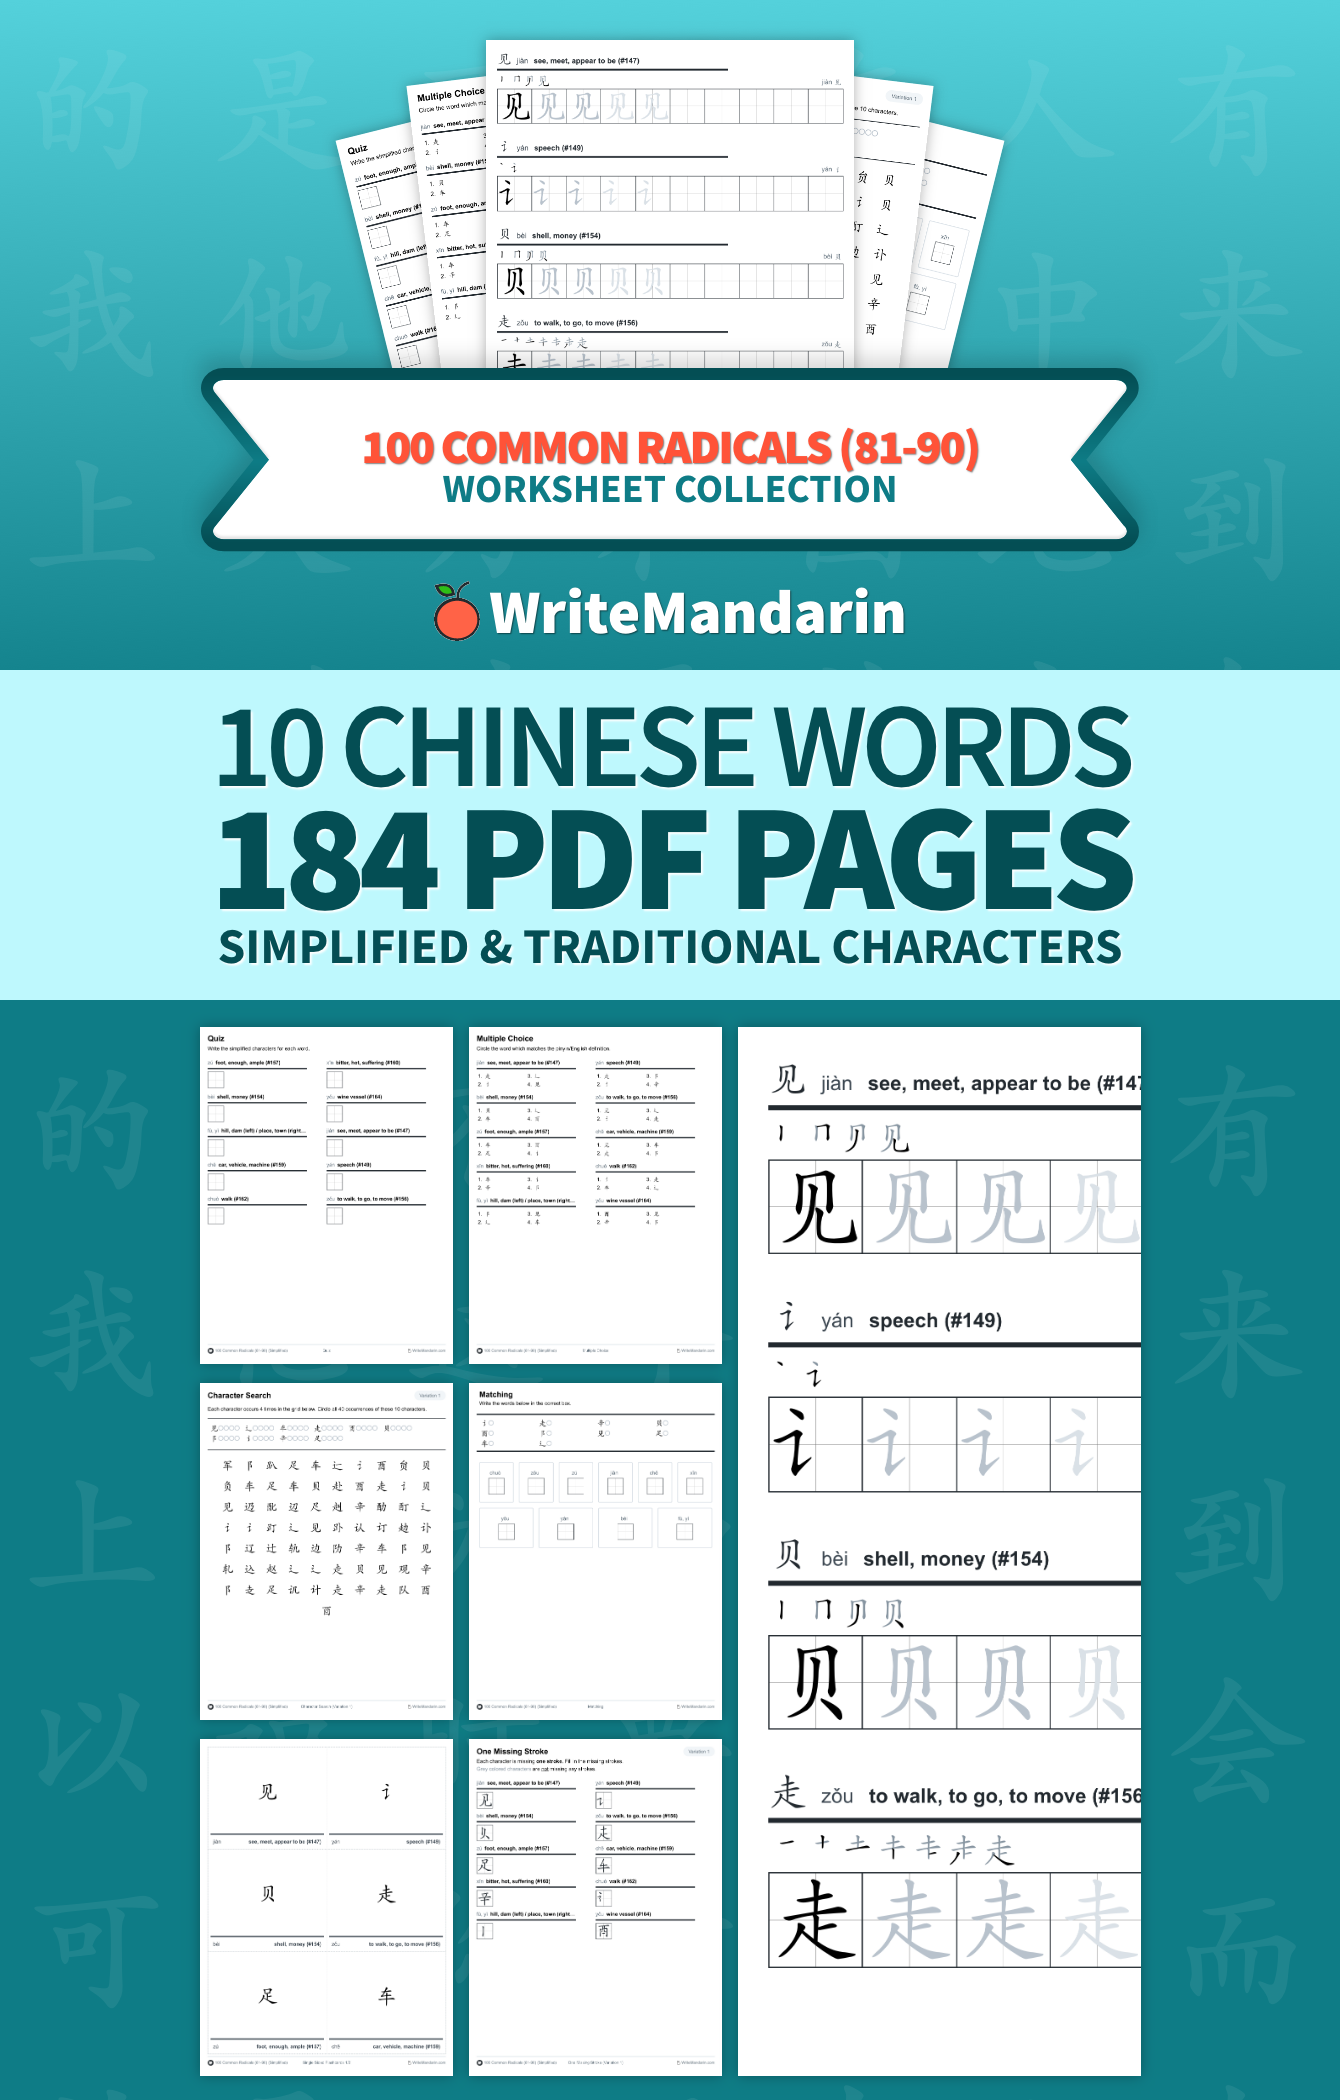 Preview image of 100 Common Radicals (81-90) worksheet collection